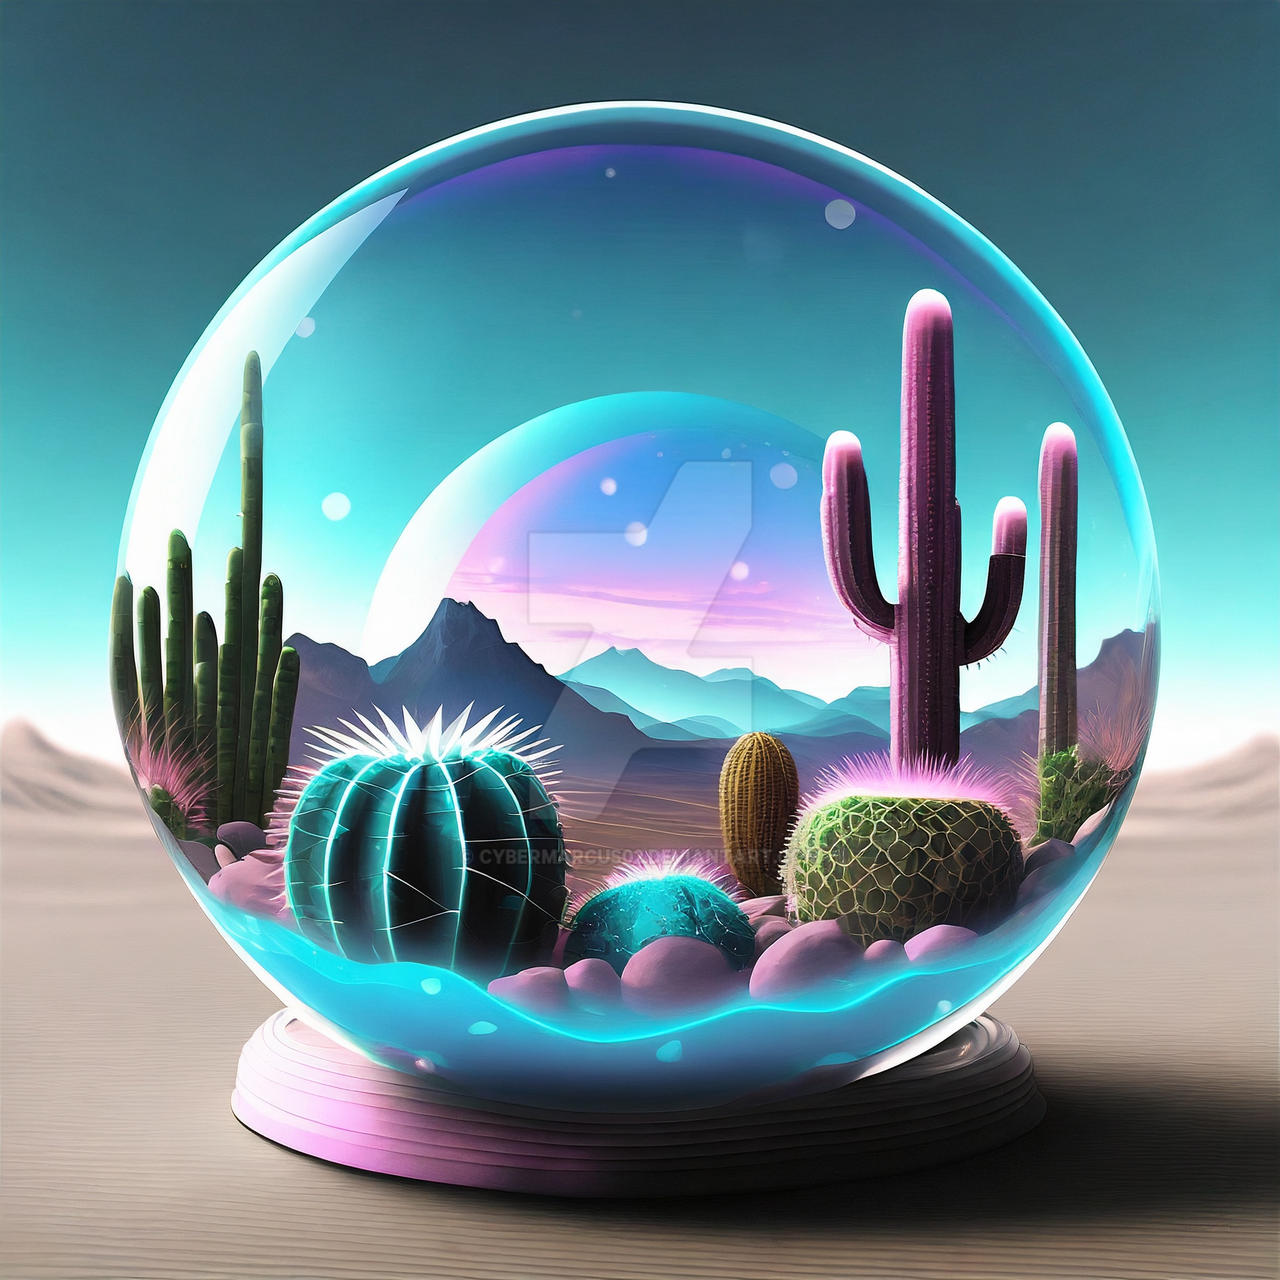 Cactus by Cybermarcus02 on DeviantArt